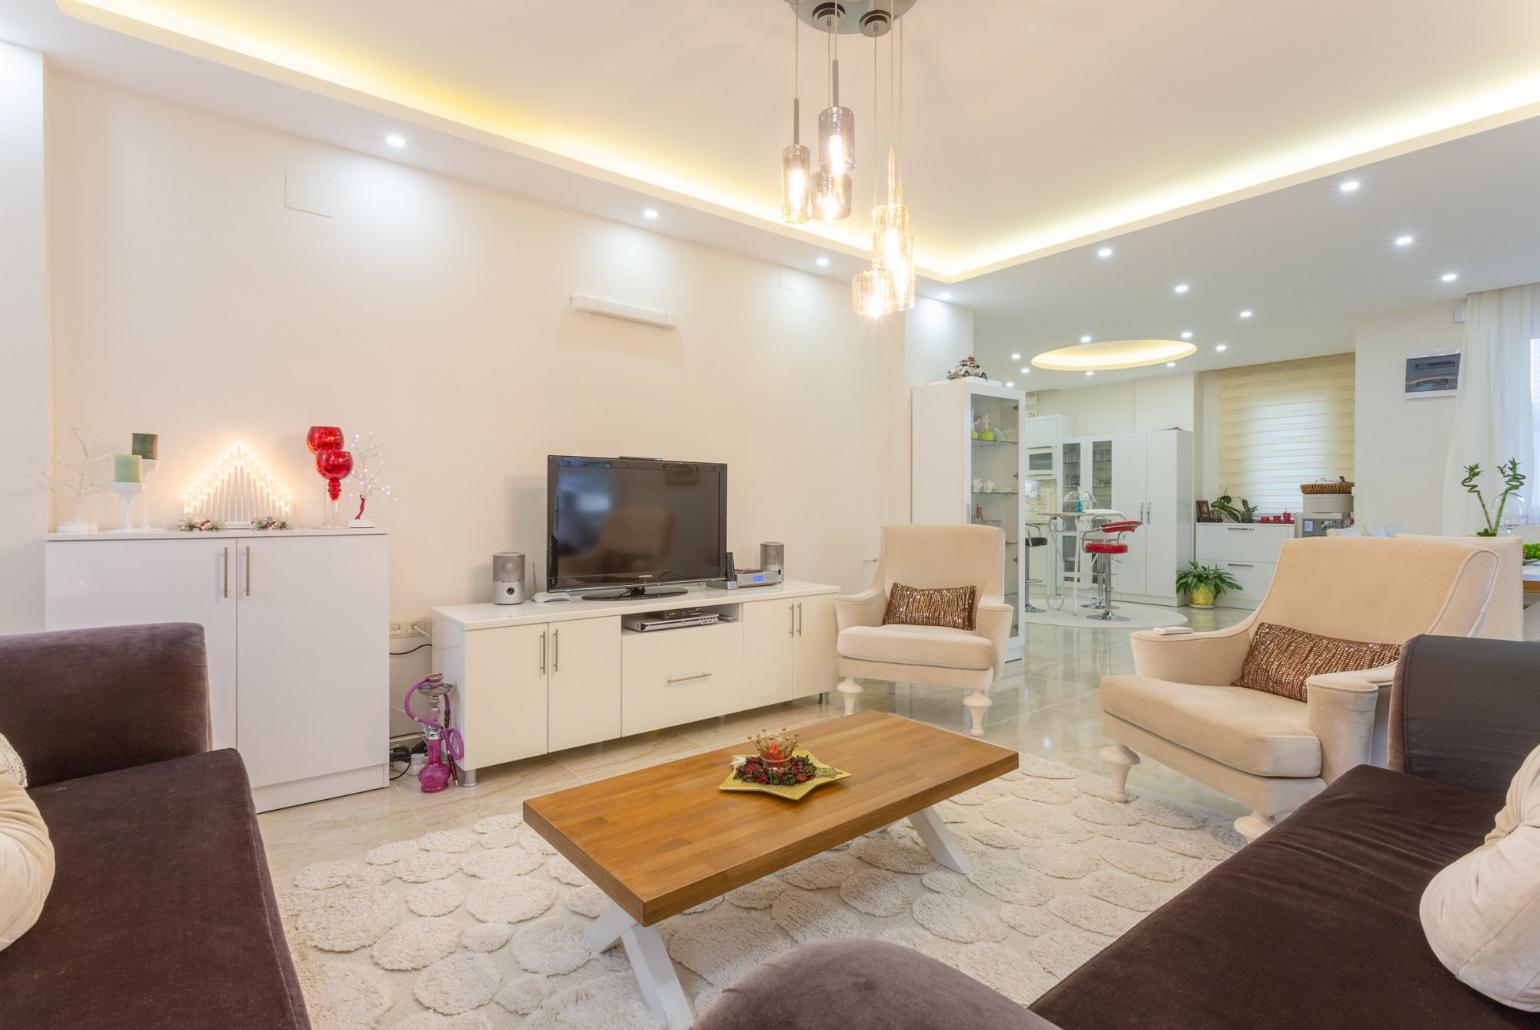 Open-plan living room with sofas, dining area, kitchen, A/C, WiFi internet, satellite TV, DVD player, and pool terrace access